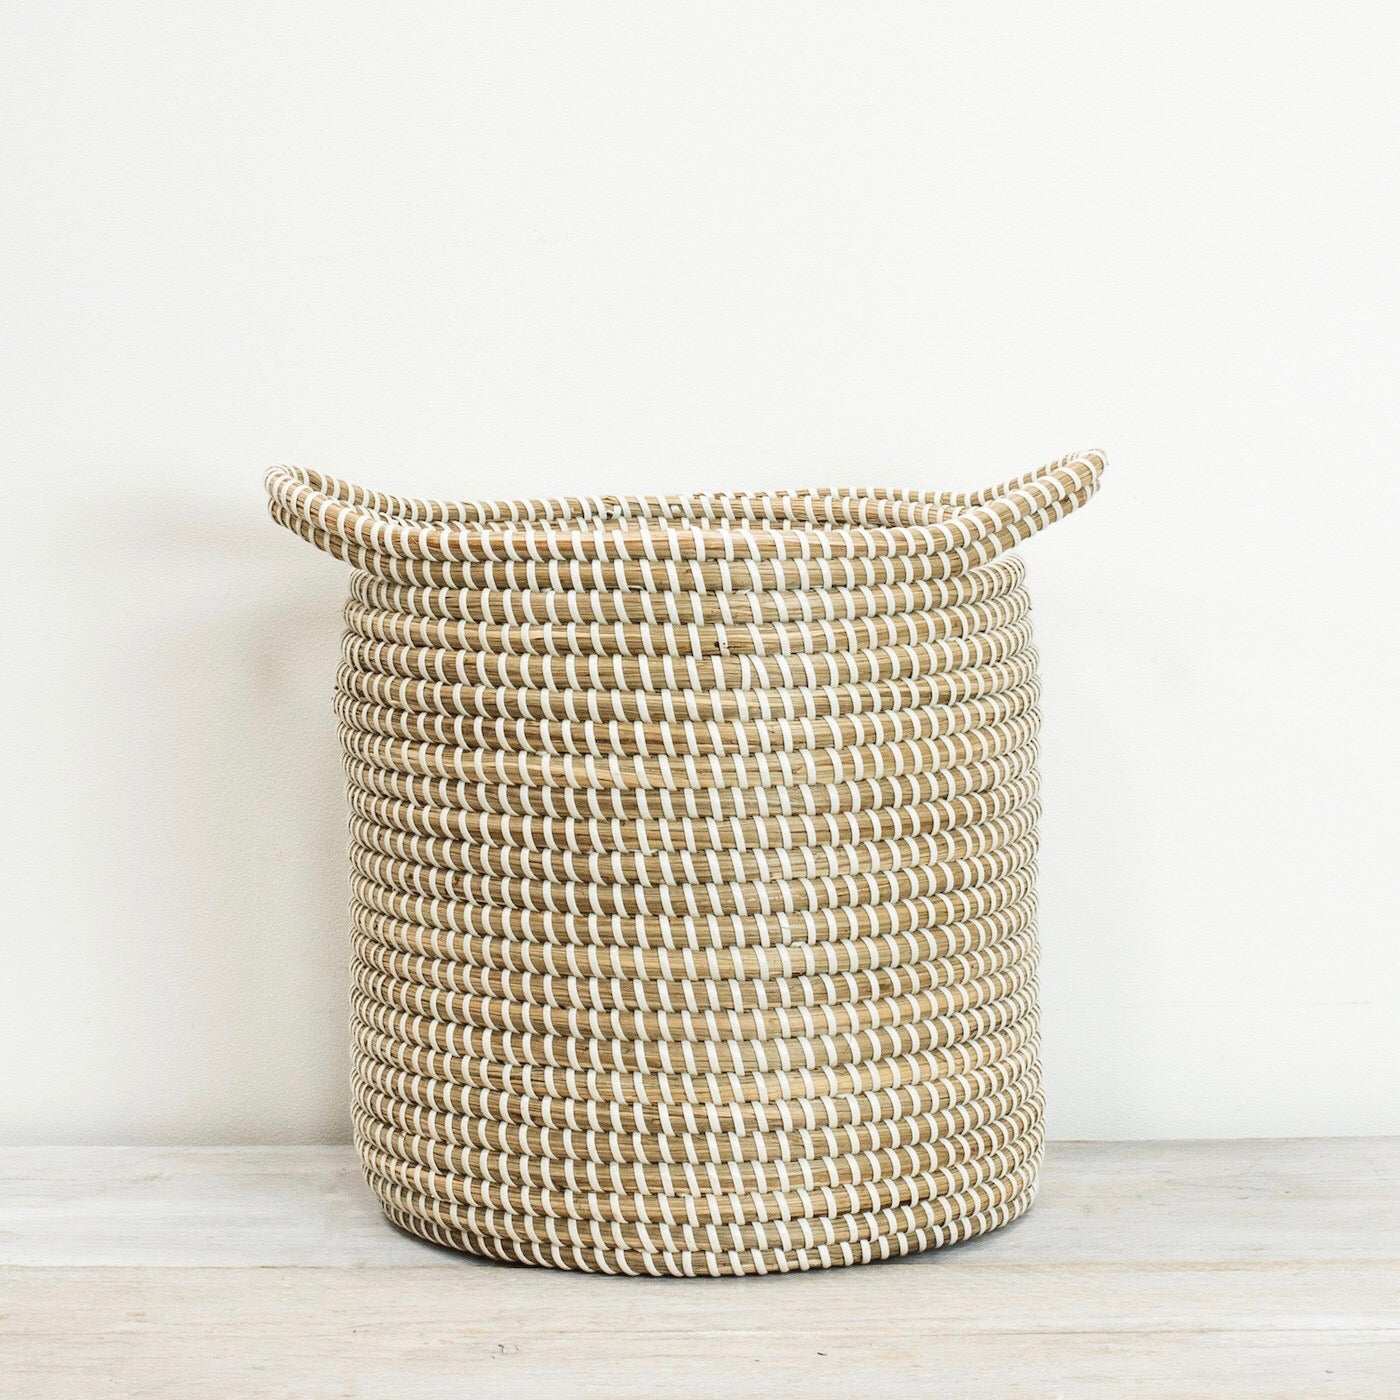 Tall Seagrass Basket - Bagel&Griff